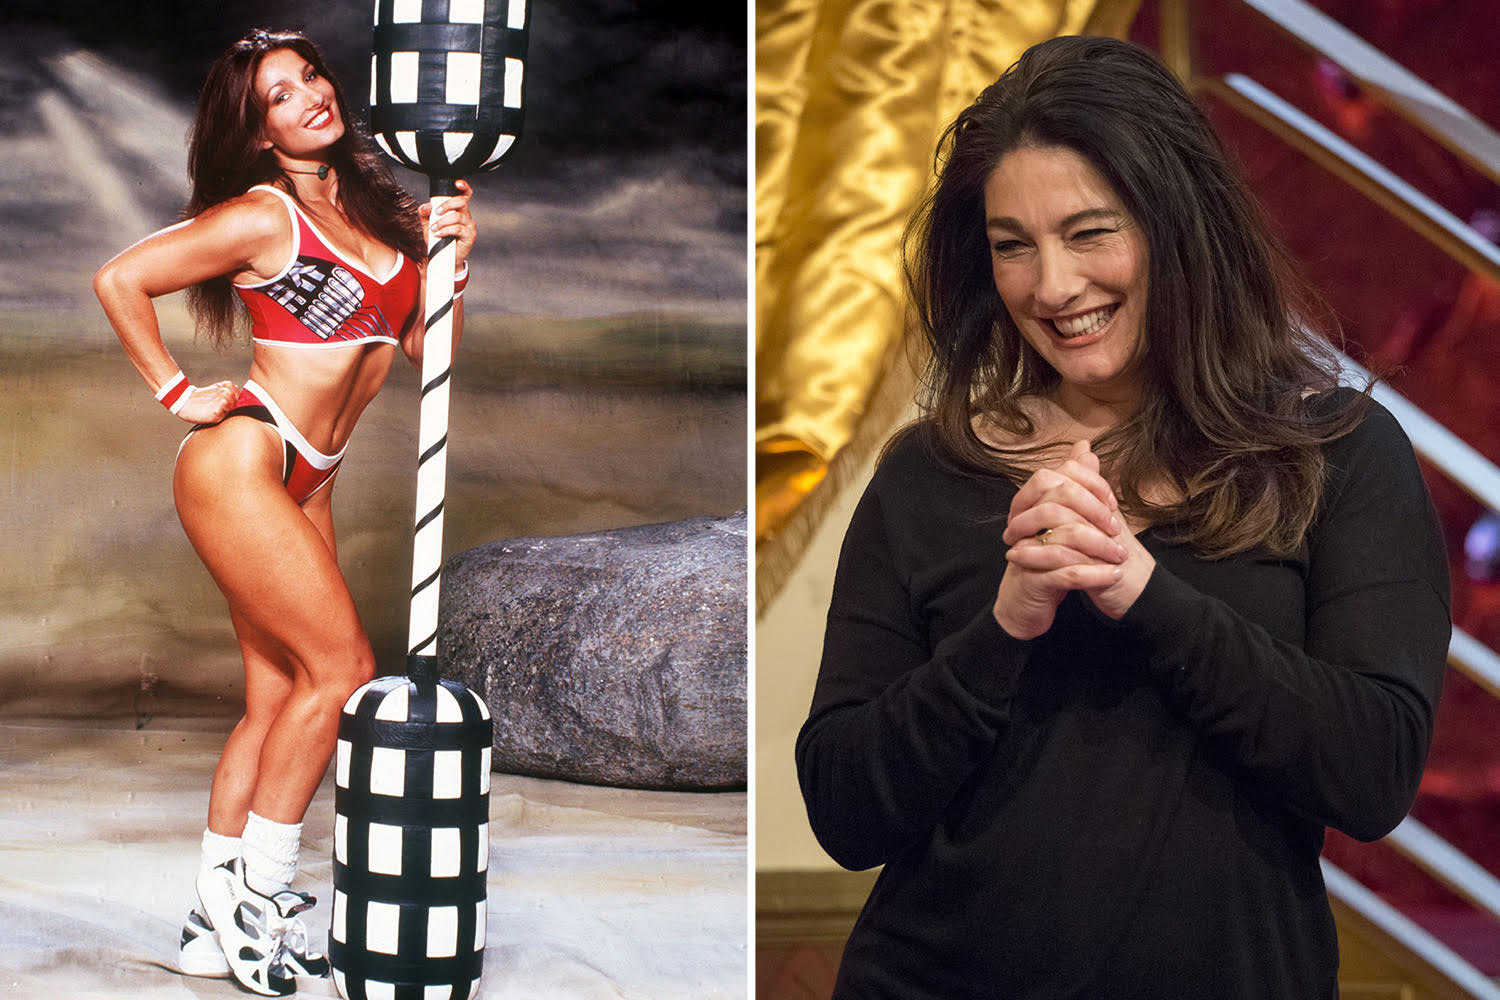  Diane Youdale, aka Jet, suffered a bad injury to her nose while on Gladiators